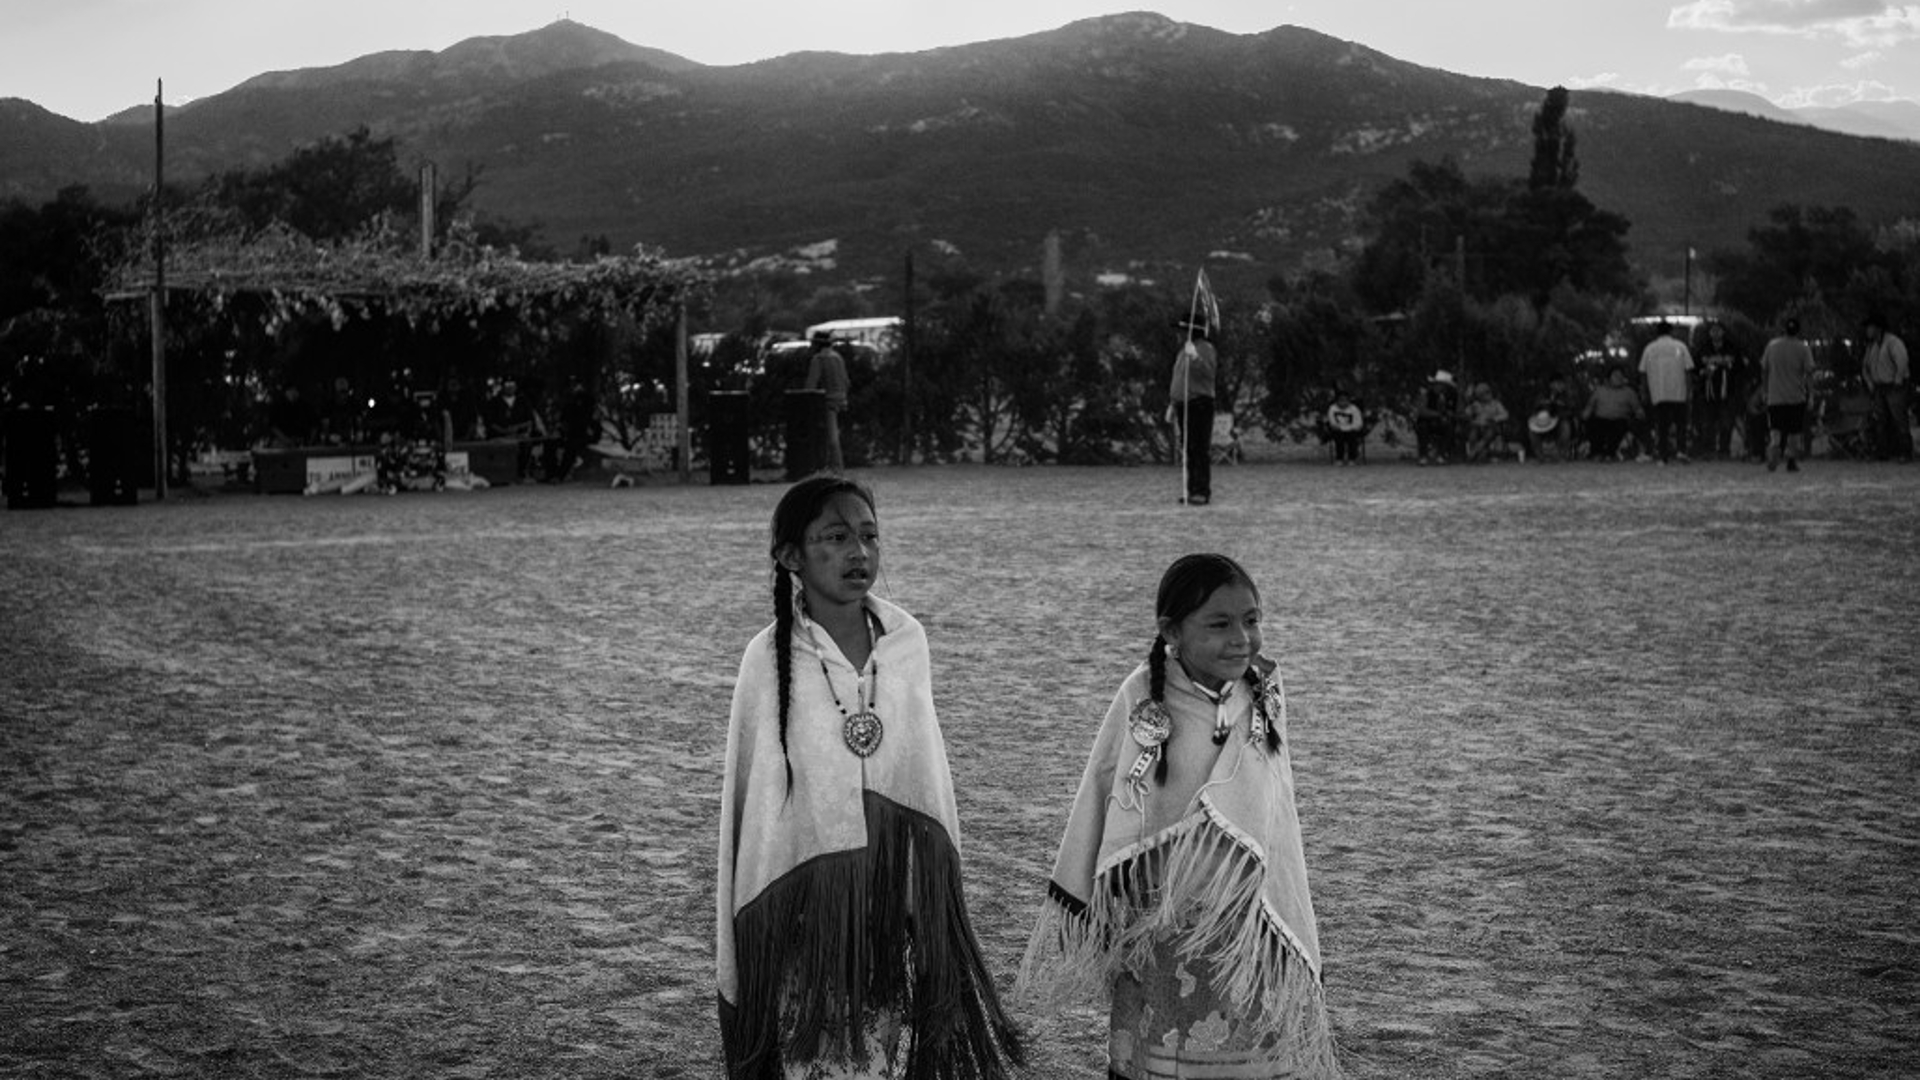 Two Native American girls stand in a field with mountains in the background.